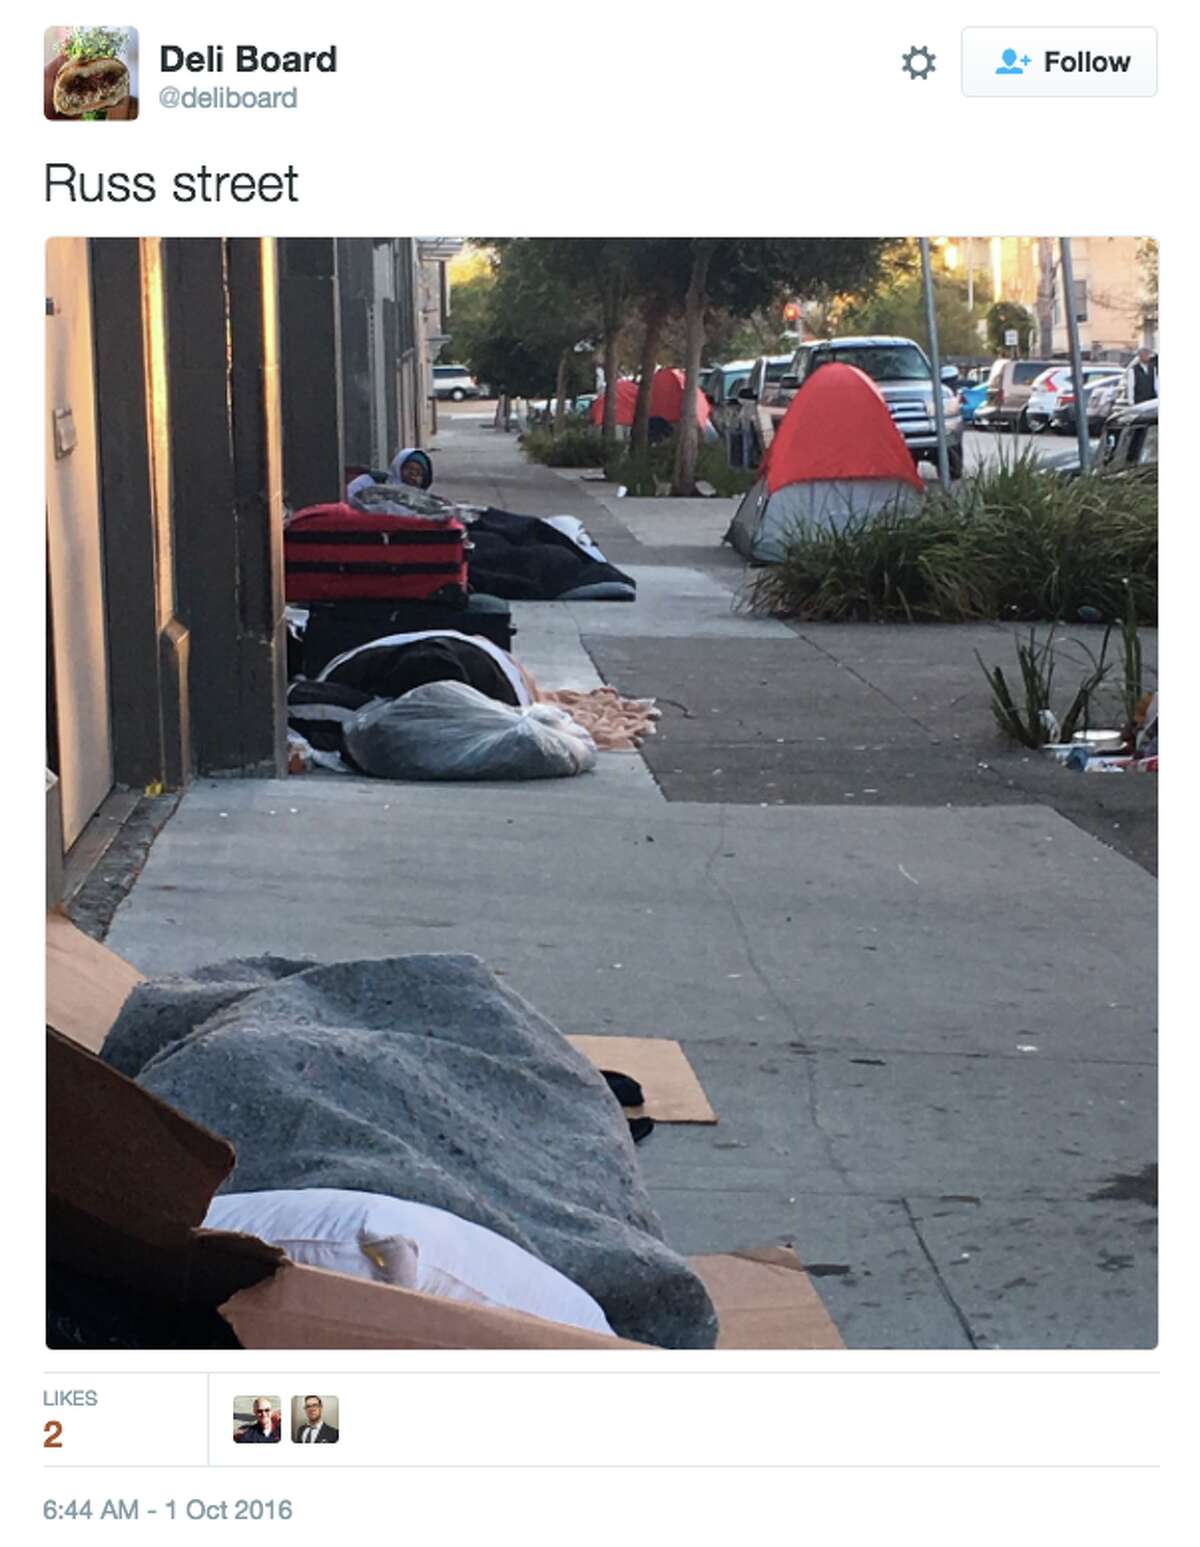 Adam Mesnick, owner of San Francisco's Deli Board, has been posting photos from around San Francisco's SoMa neighborhood, many with pointed messages targeted at SF Mayor Ed Lee. 